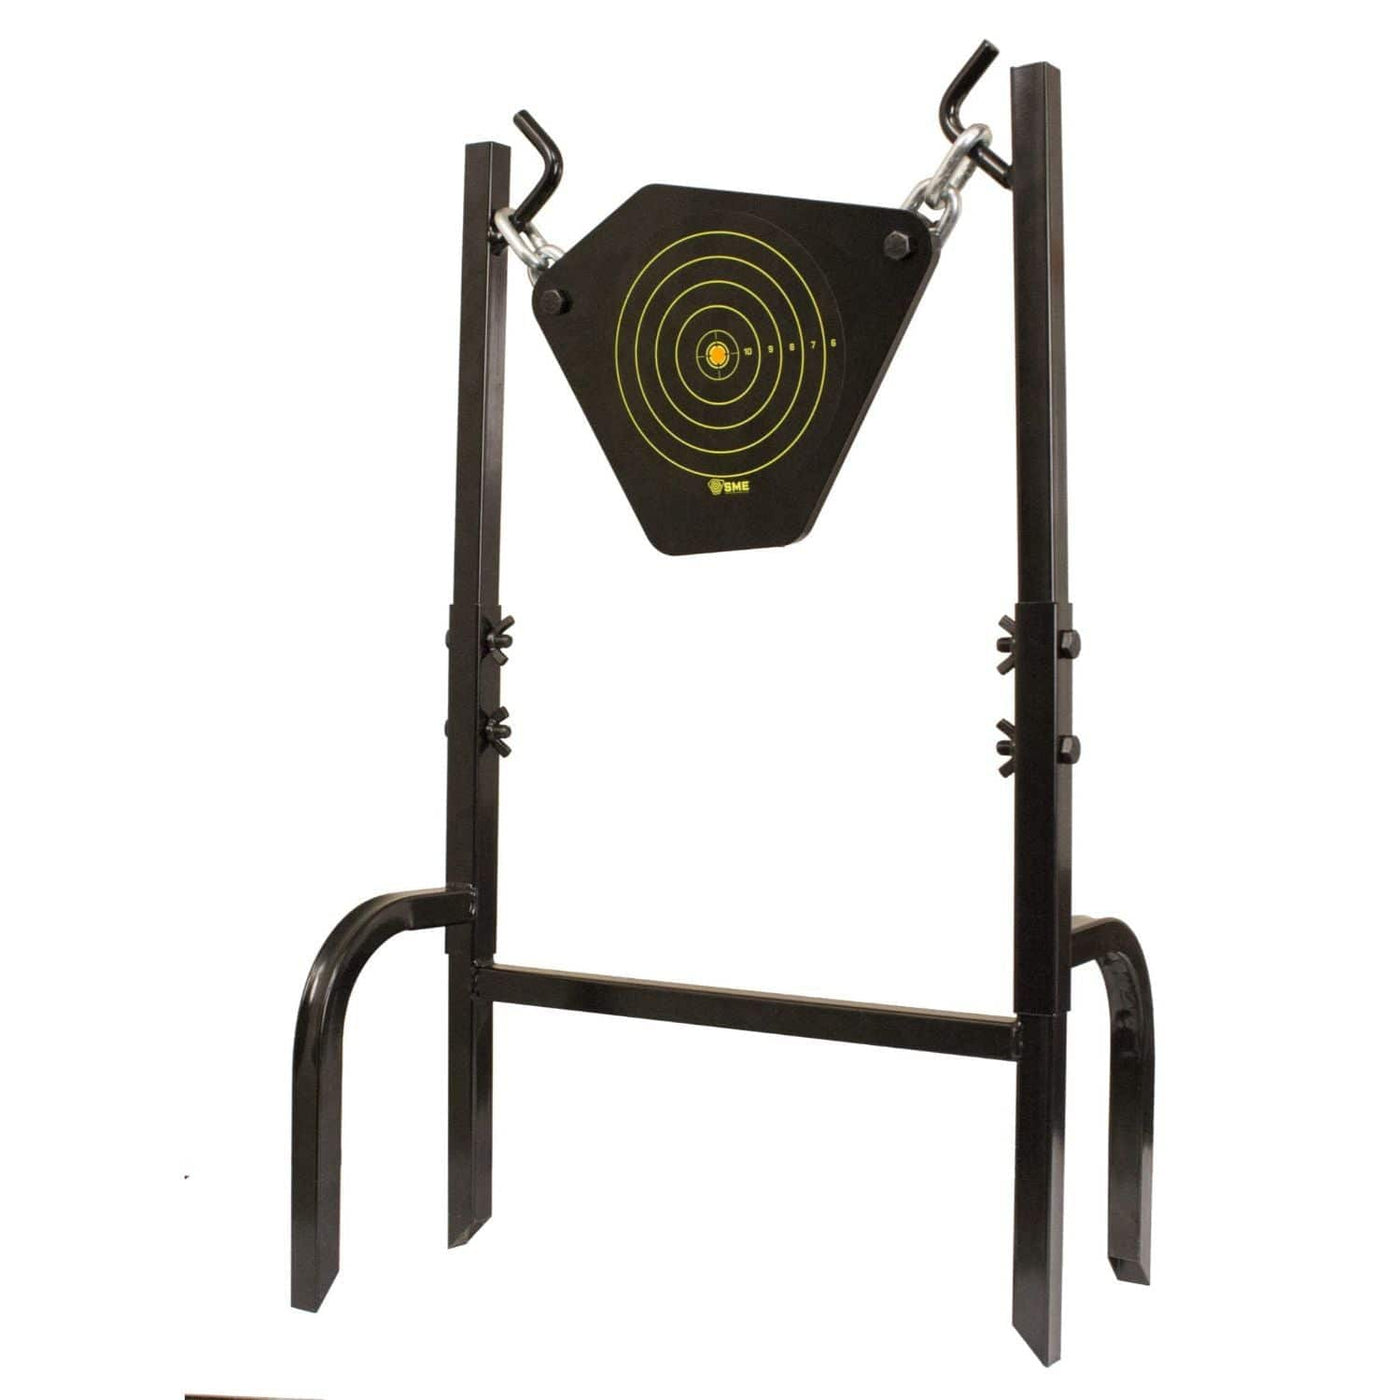 Shooting Made Easy SME 9.5 inch Steel Gong Shooting